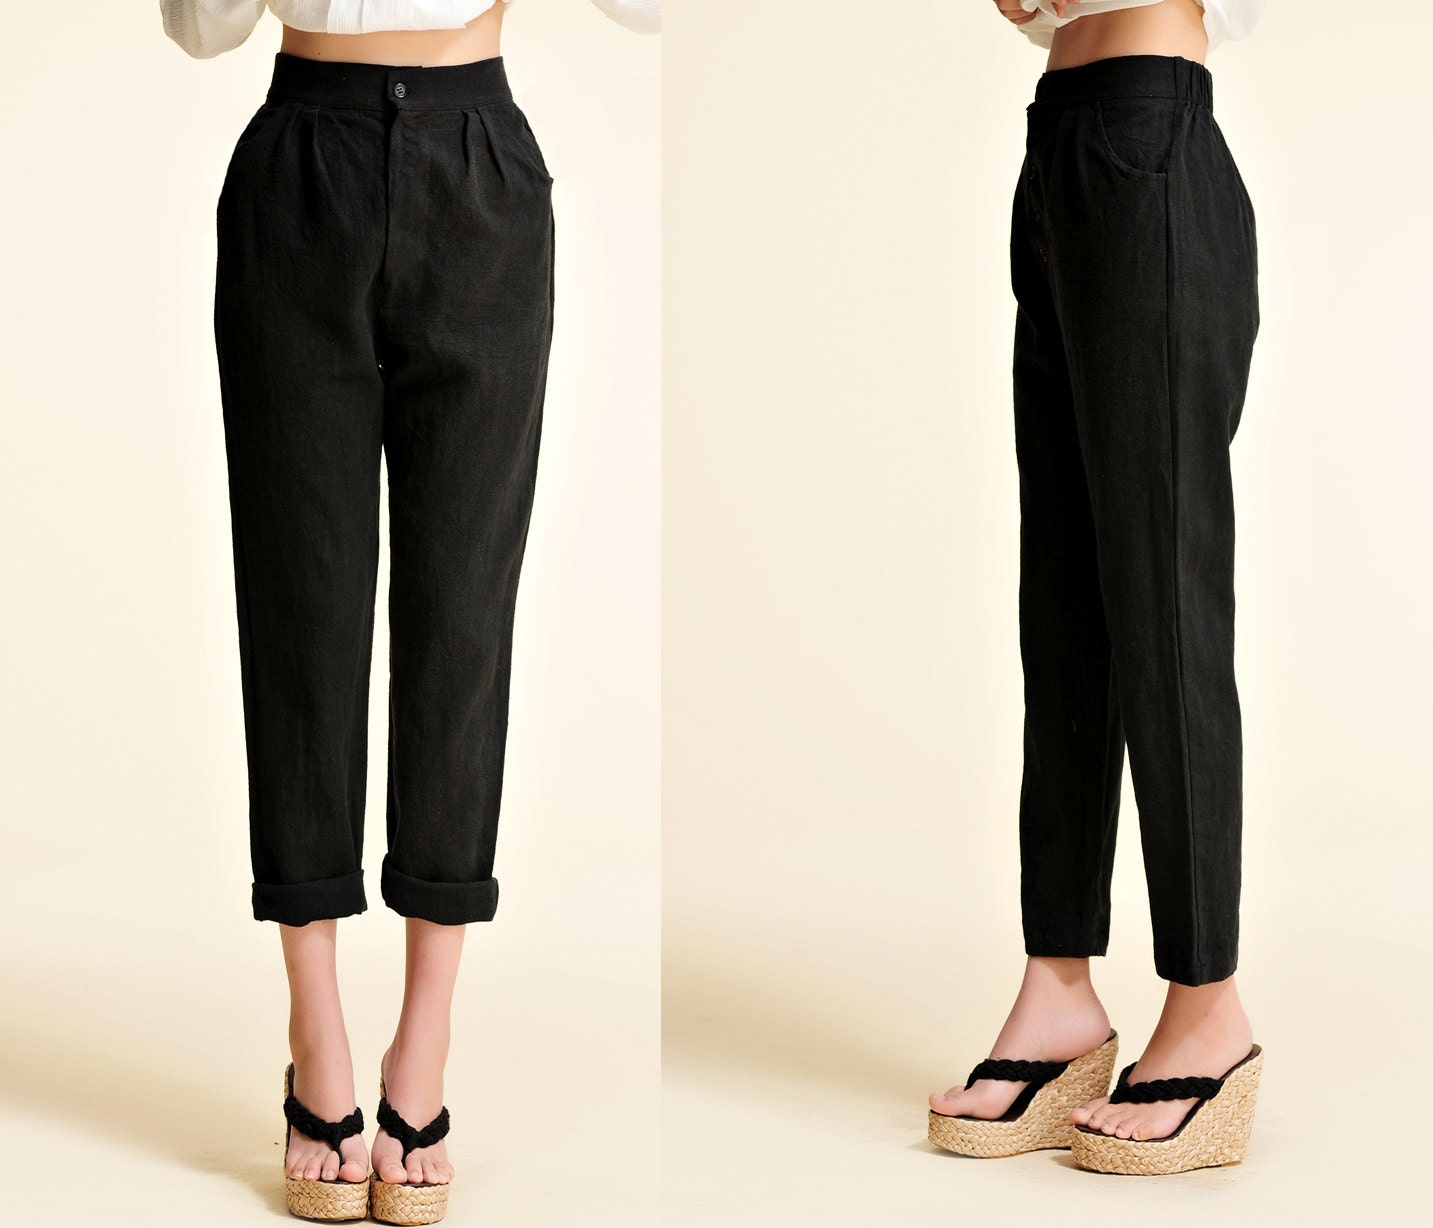 Narrow Ankle Women's Linen Pants with Elastic Waist / Easy